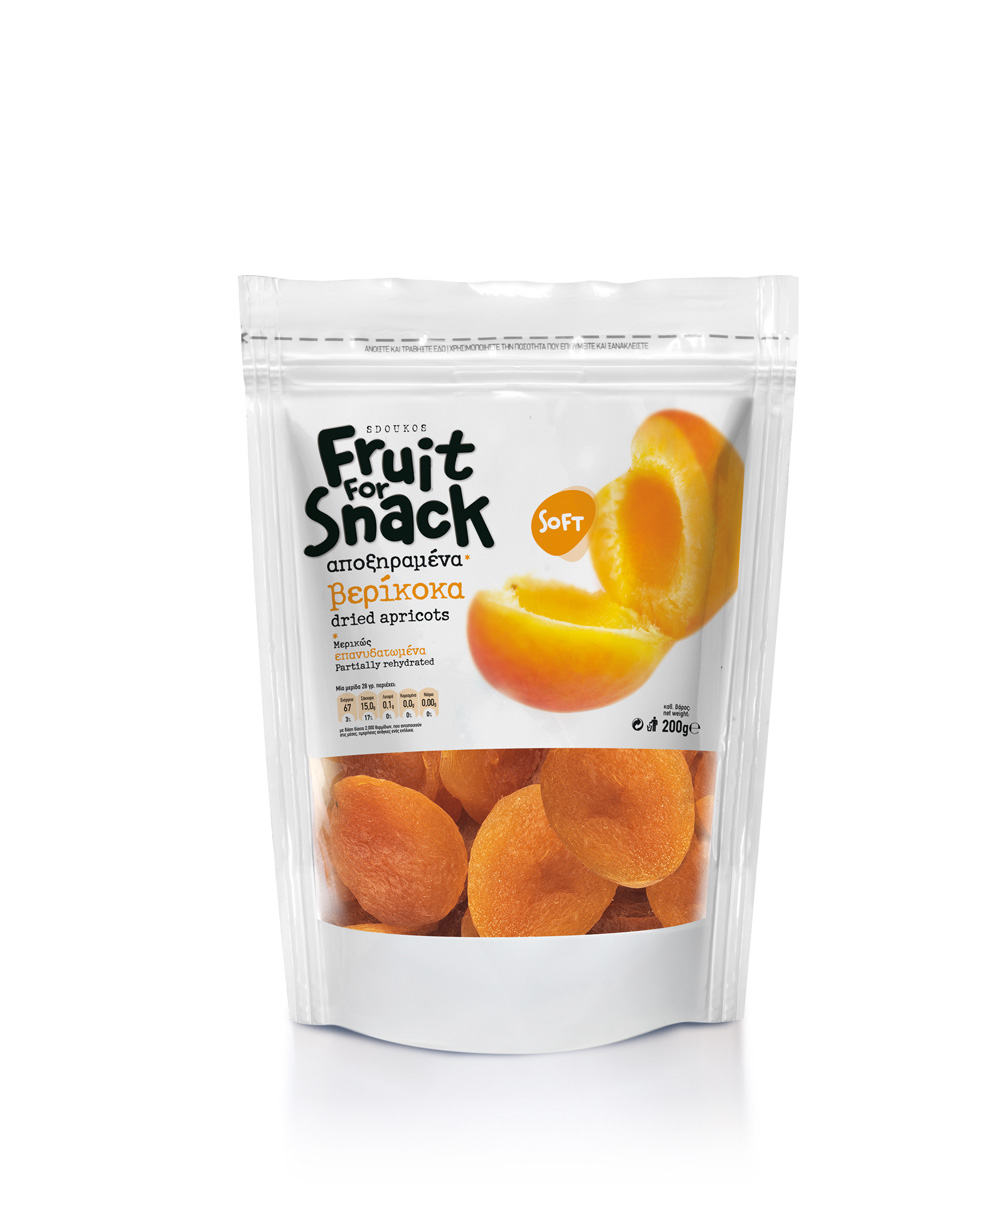 DRIED APRICOTS PARTIALLY REHYDRATED “FRUIT FOR SNACK” 200g